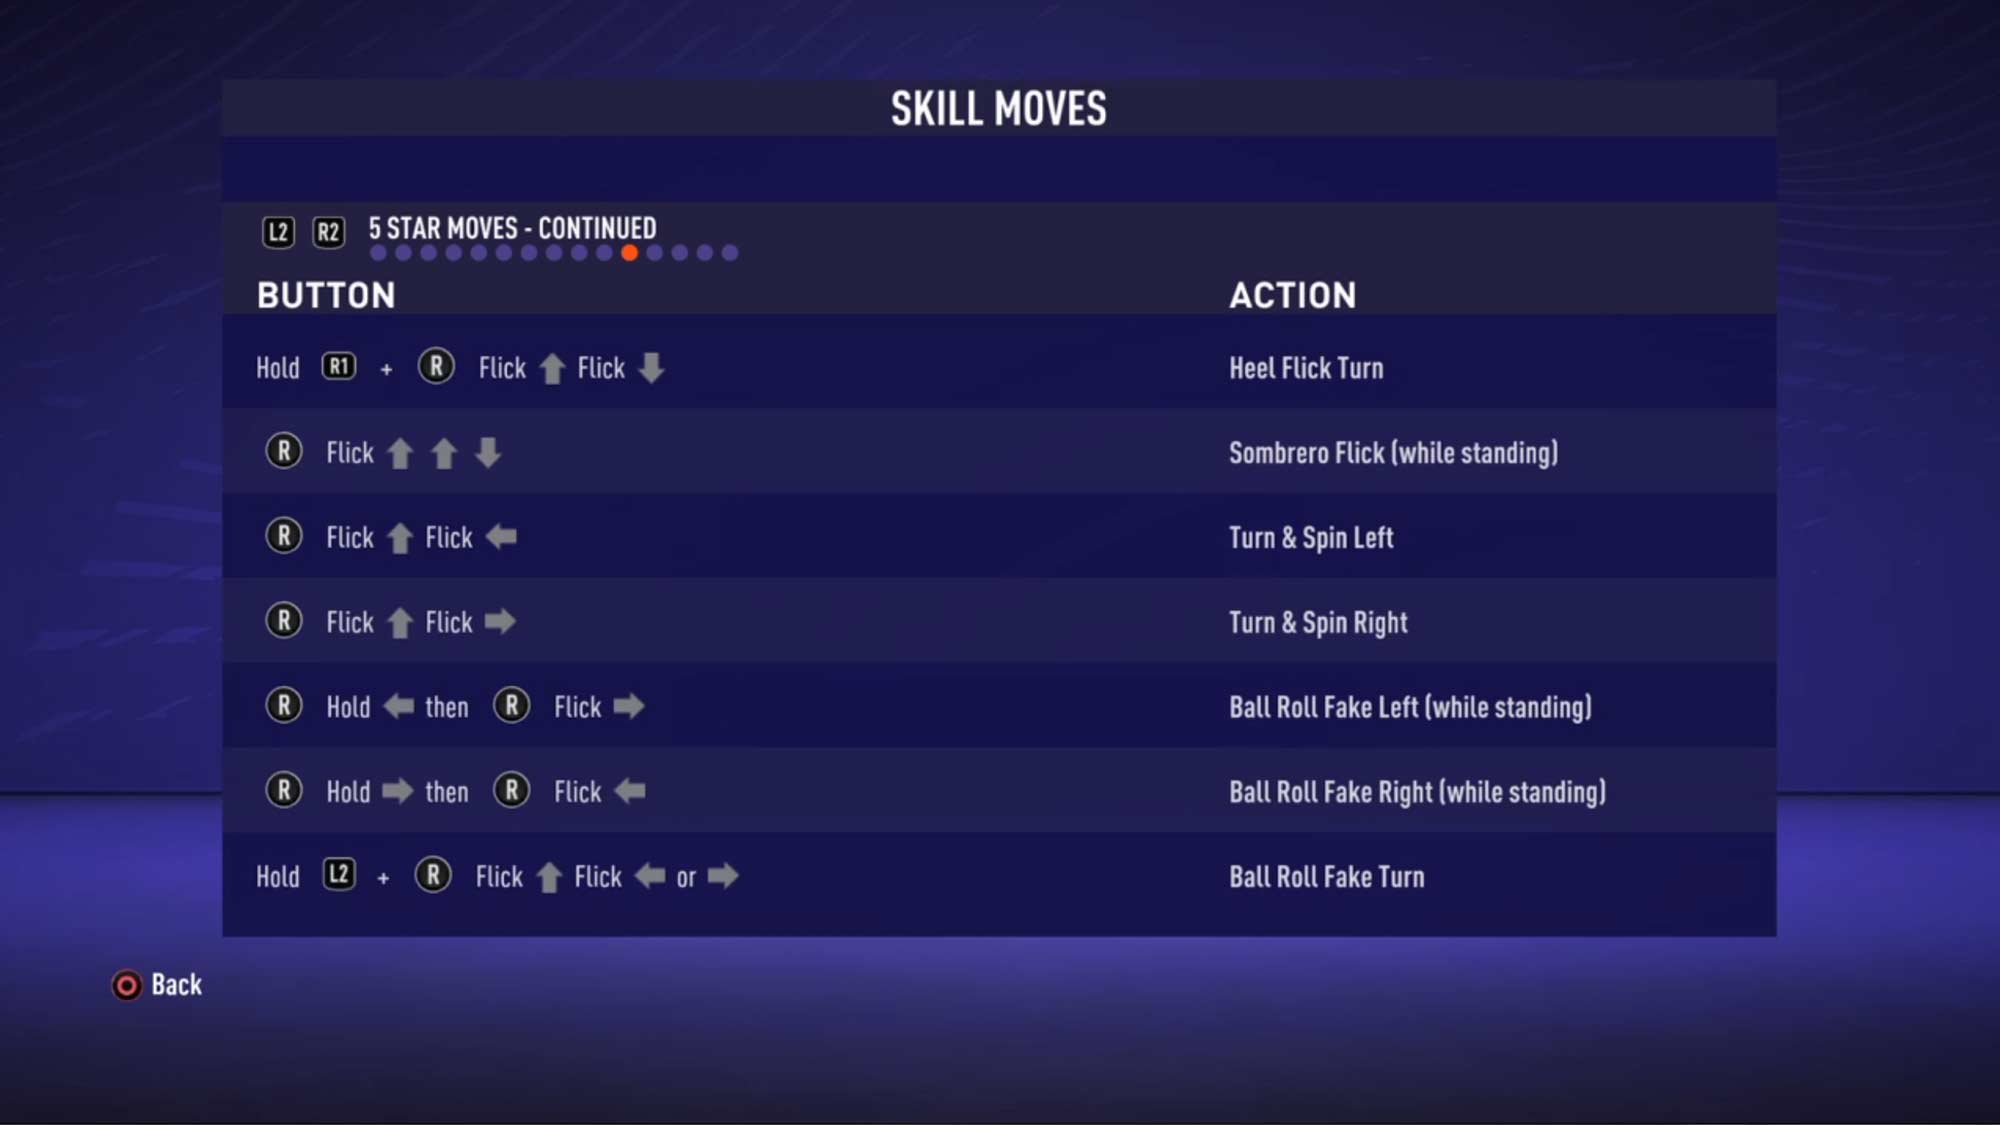 FIFA 21 Skill Moves Guide for PlayStation, Xbox and PC